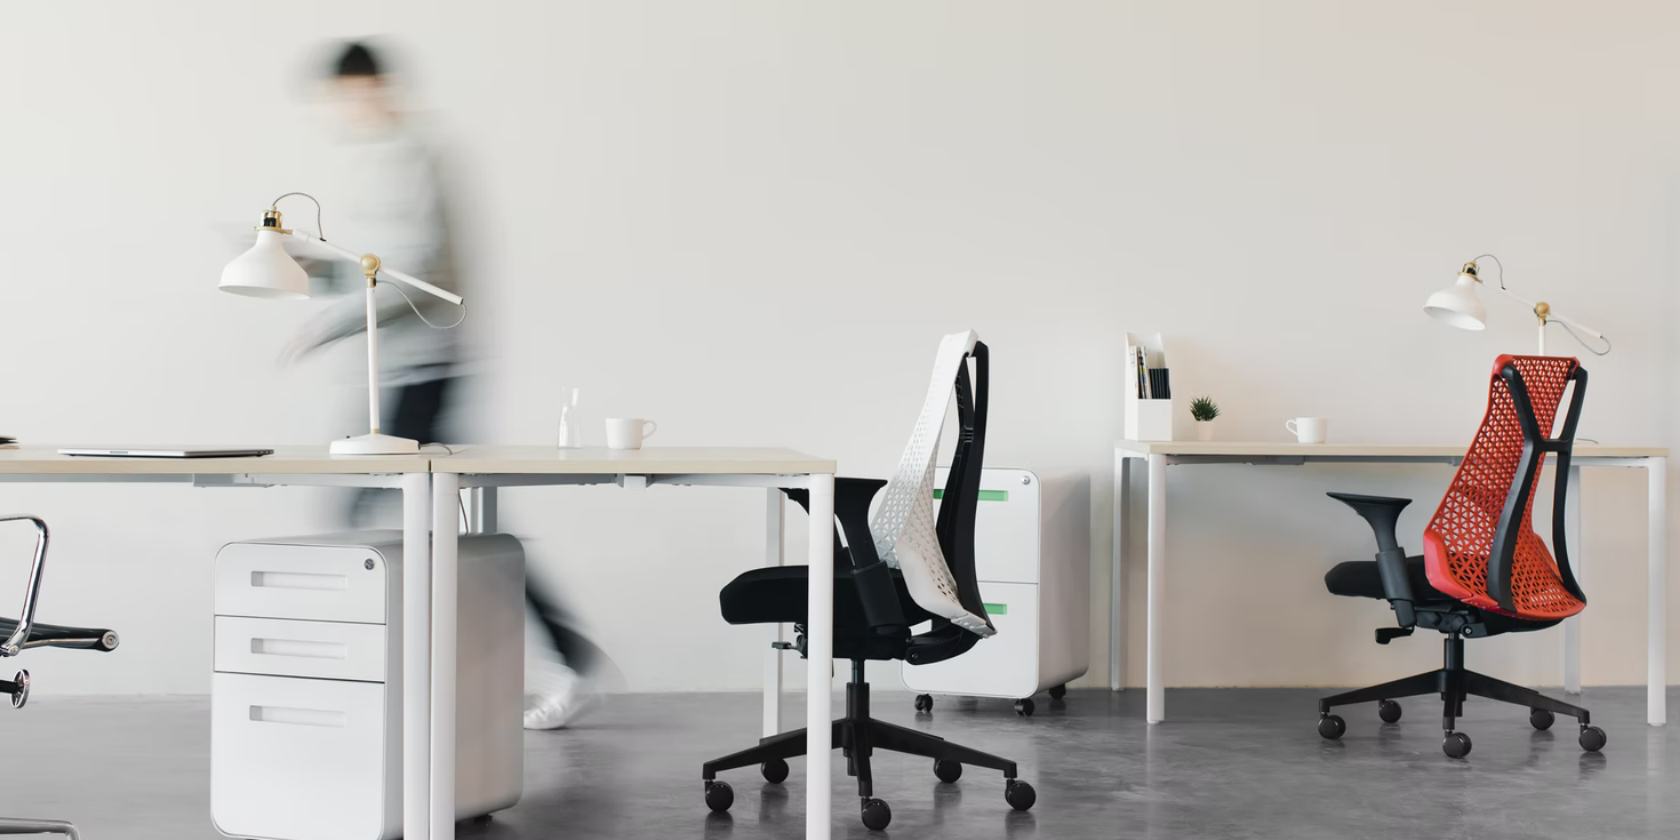 A person walking through a modern, minimalist office of chairs and desks